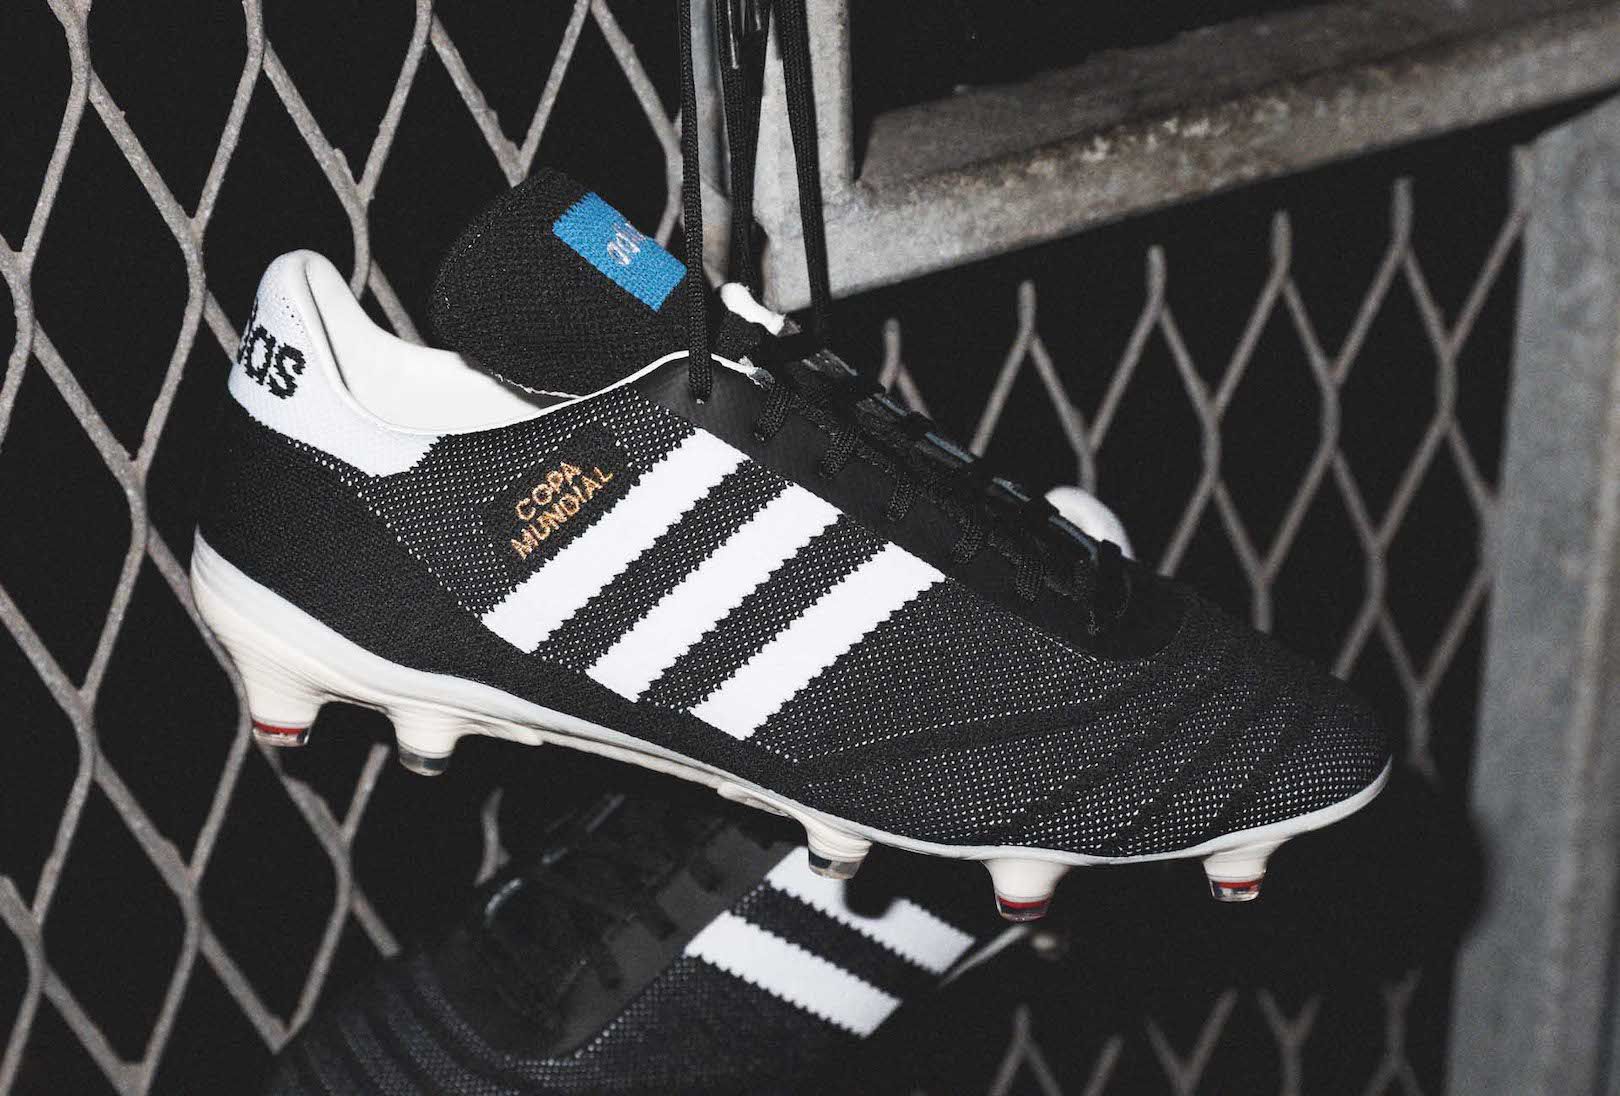 The adidas COPA Mundial are